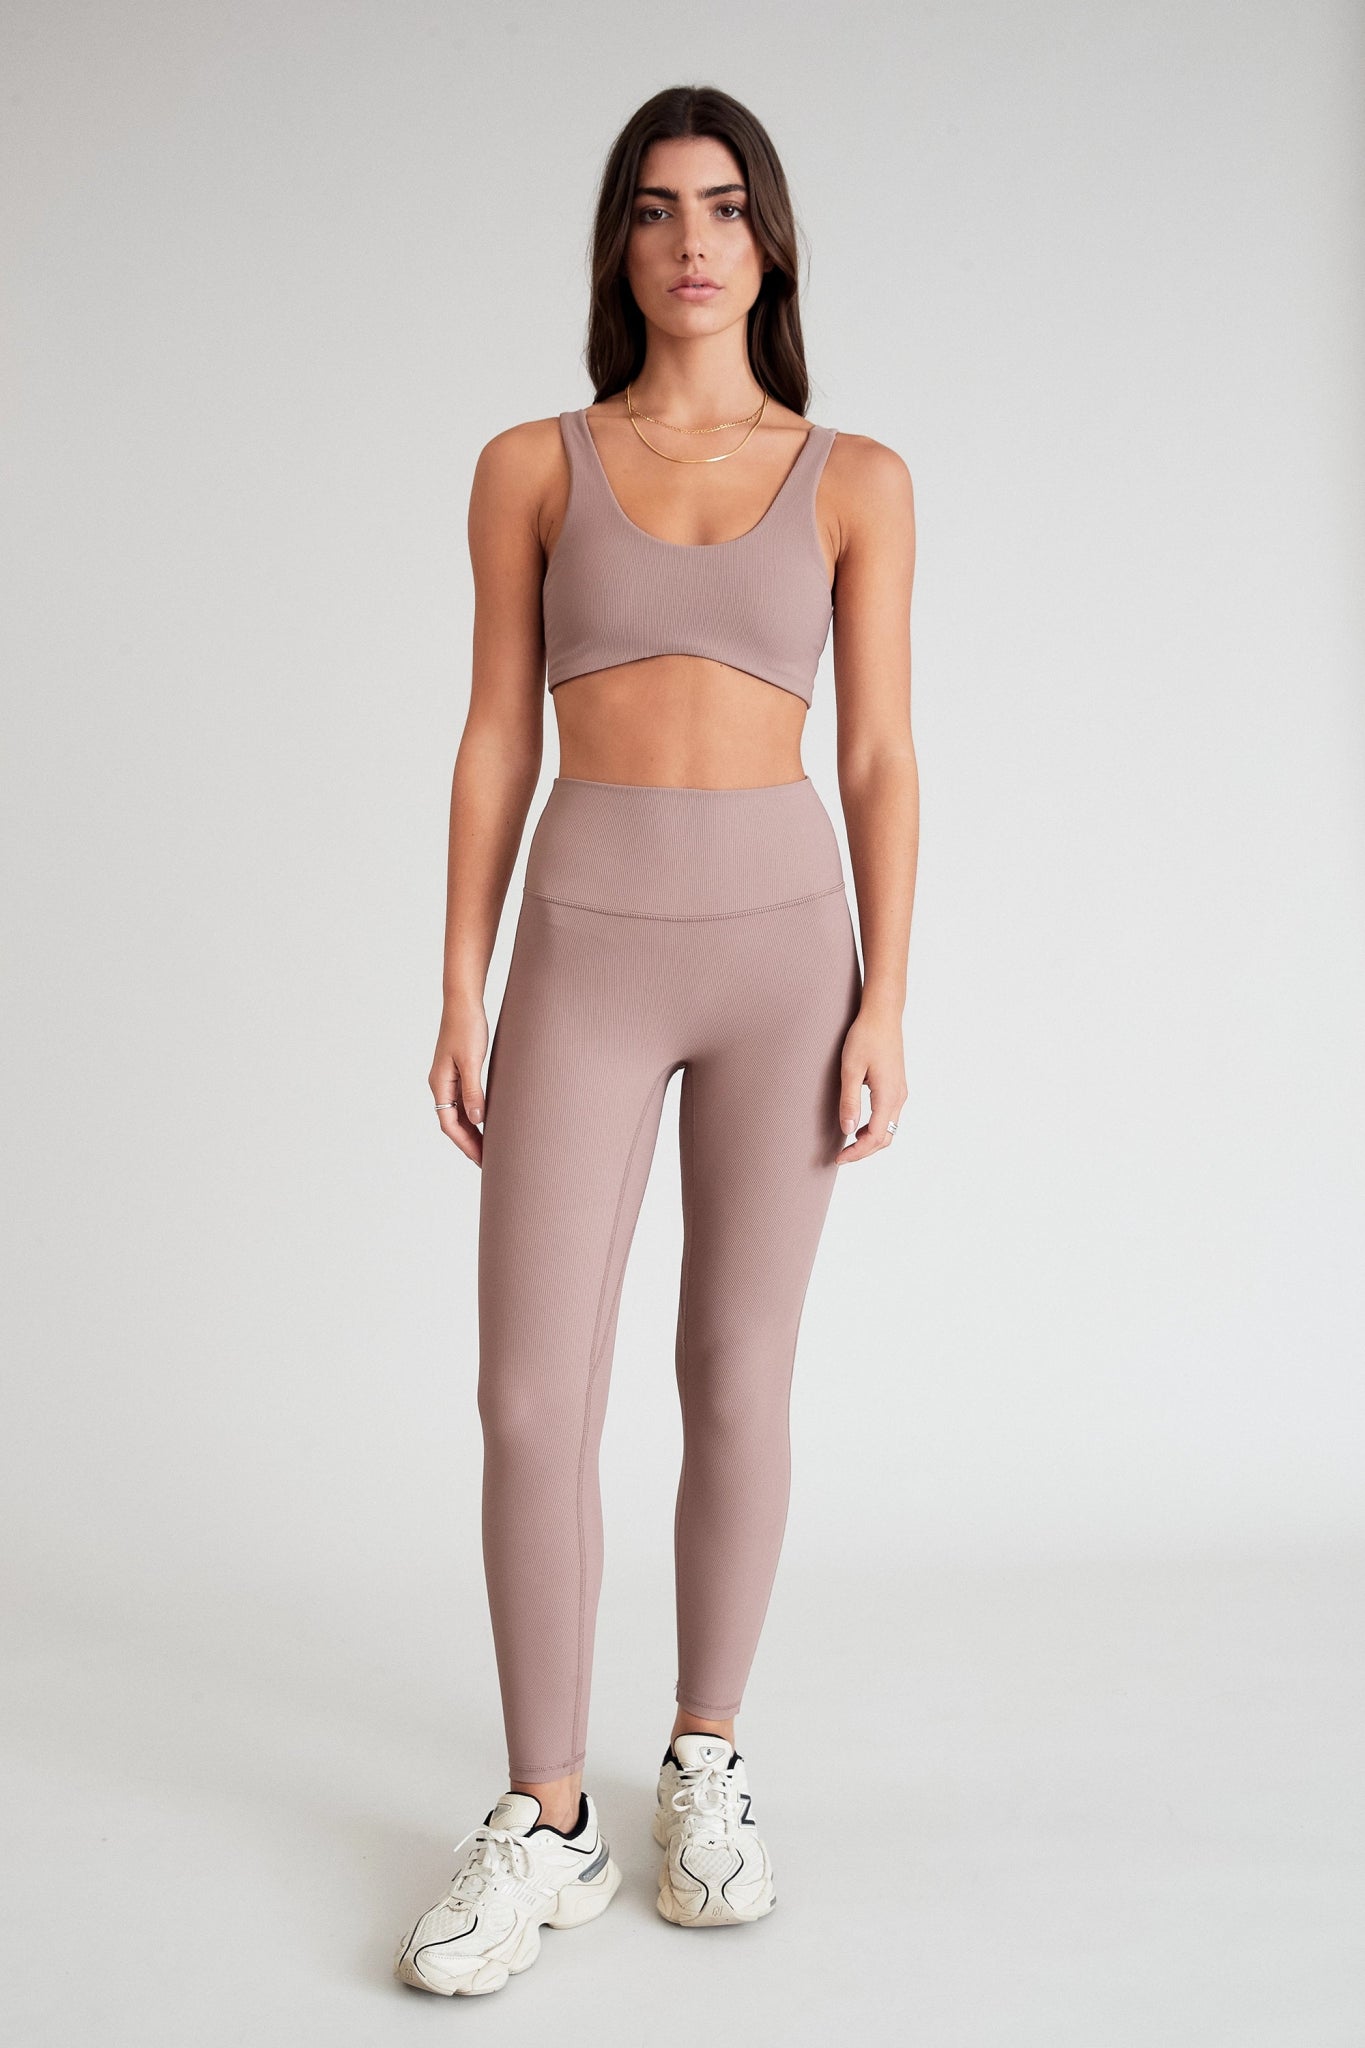 ‘Madison’ Stone Three Piece Cut Out Gym Top and Push Up Legging Set